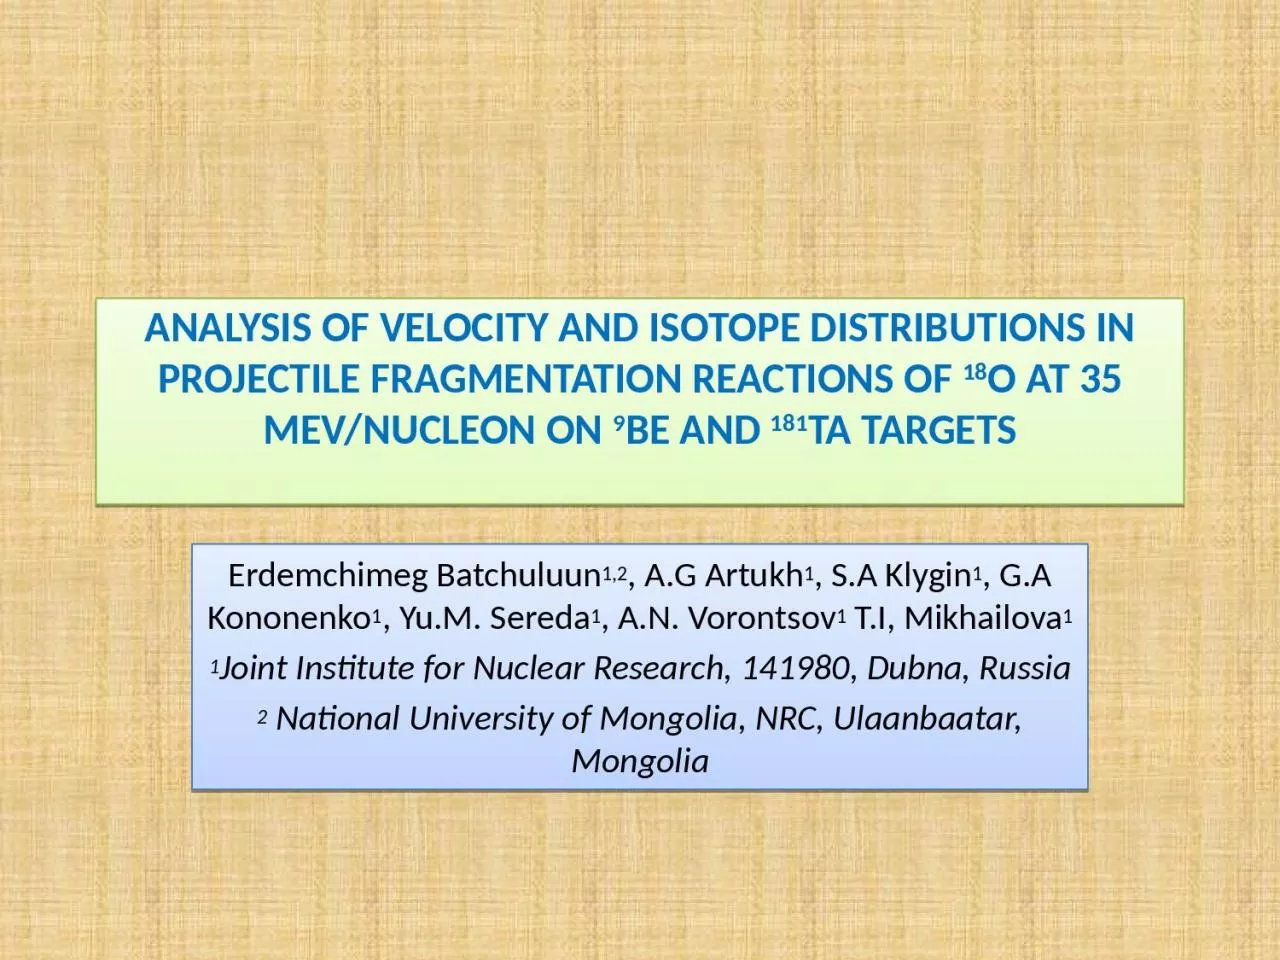 ANALYSIS OF VELOCITY AND ISOTOPE DISTRIBUTIONS IN PROJECTILE FRAGMENTATION REACTIONS OF